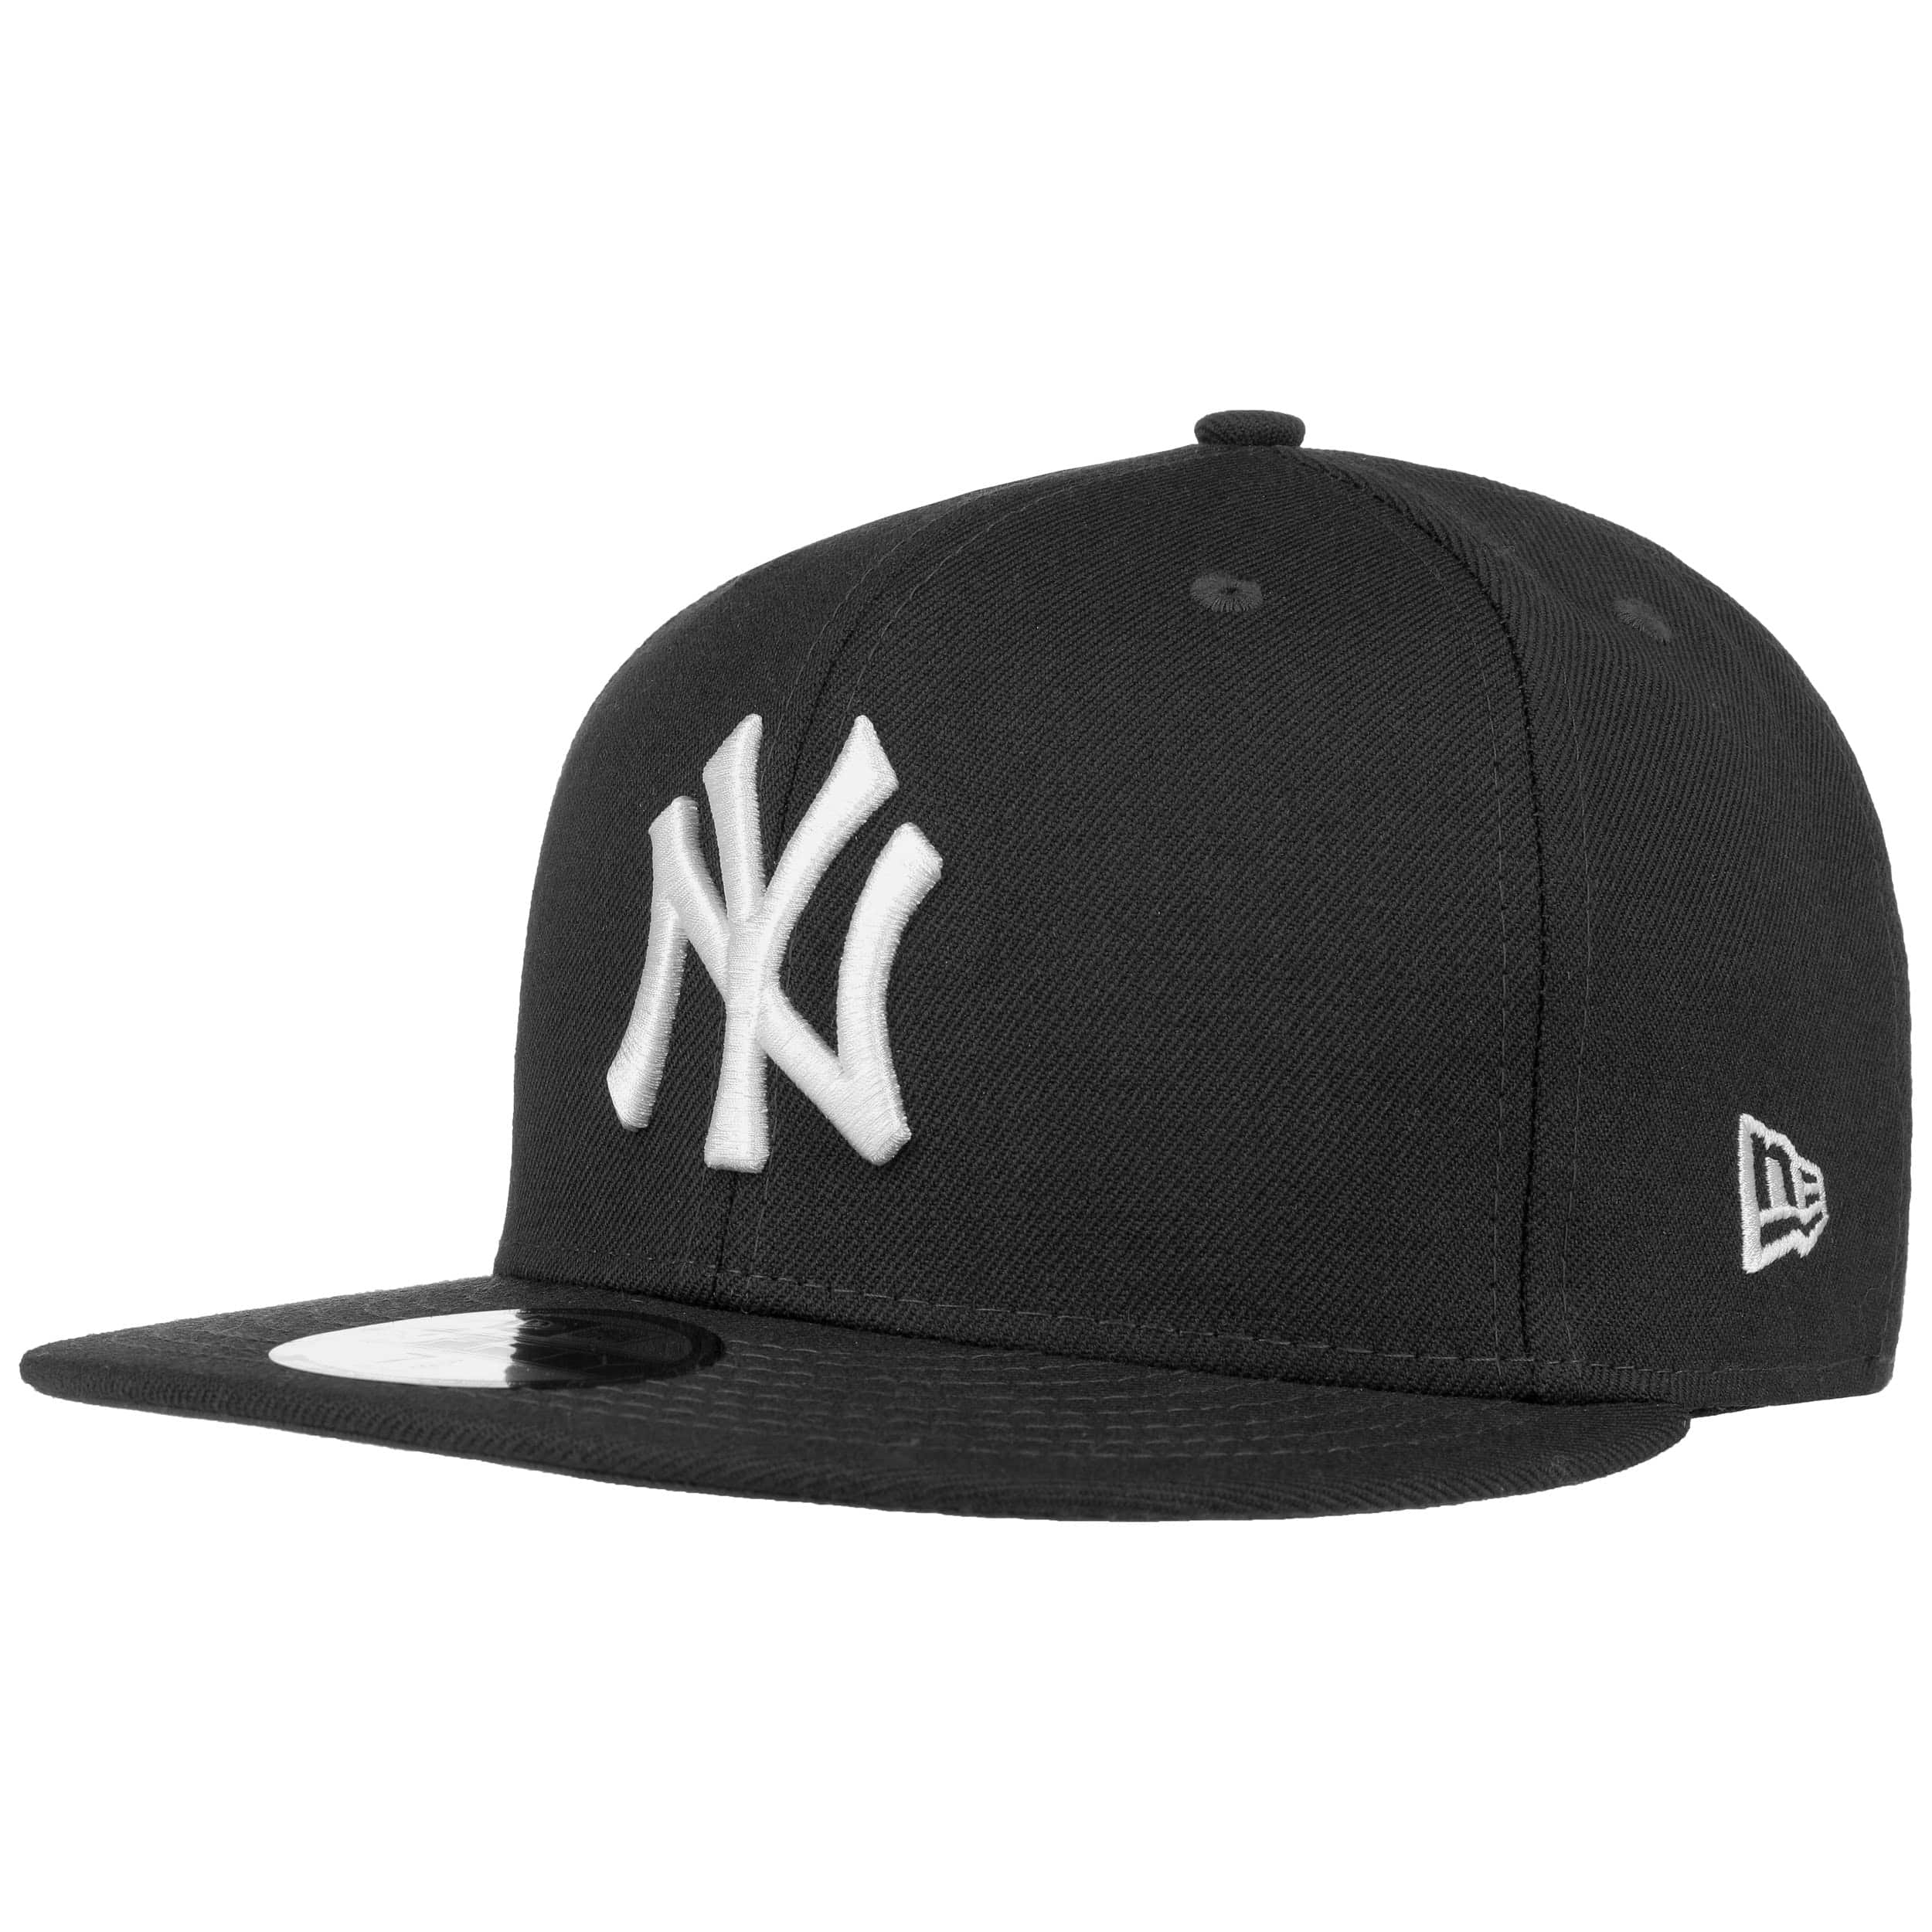 Does a new era ny cap fit to my face? : r/hats